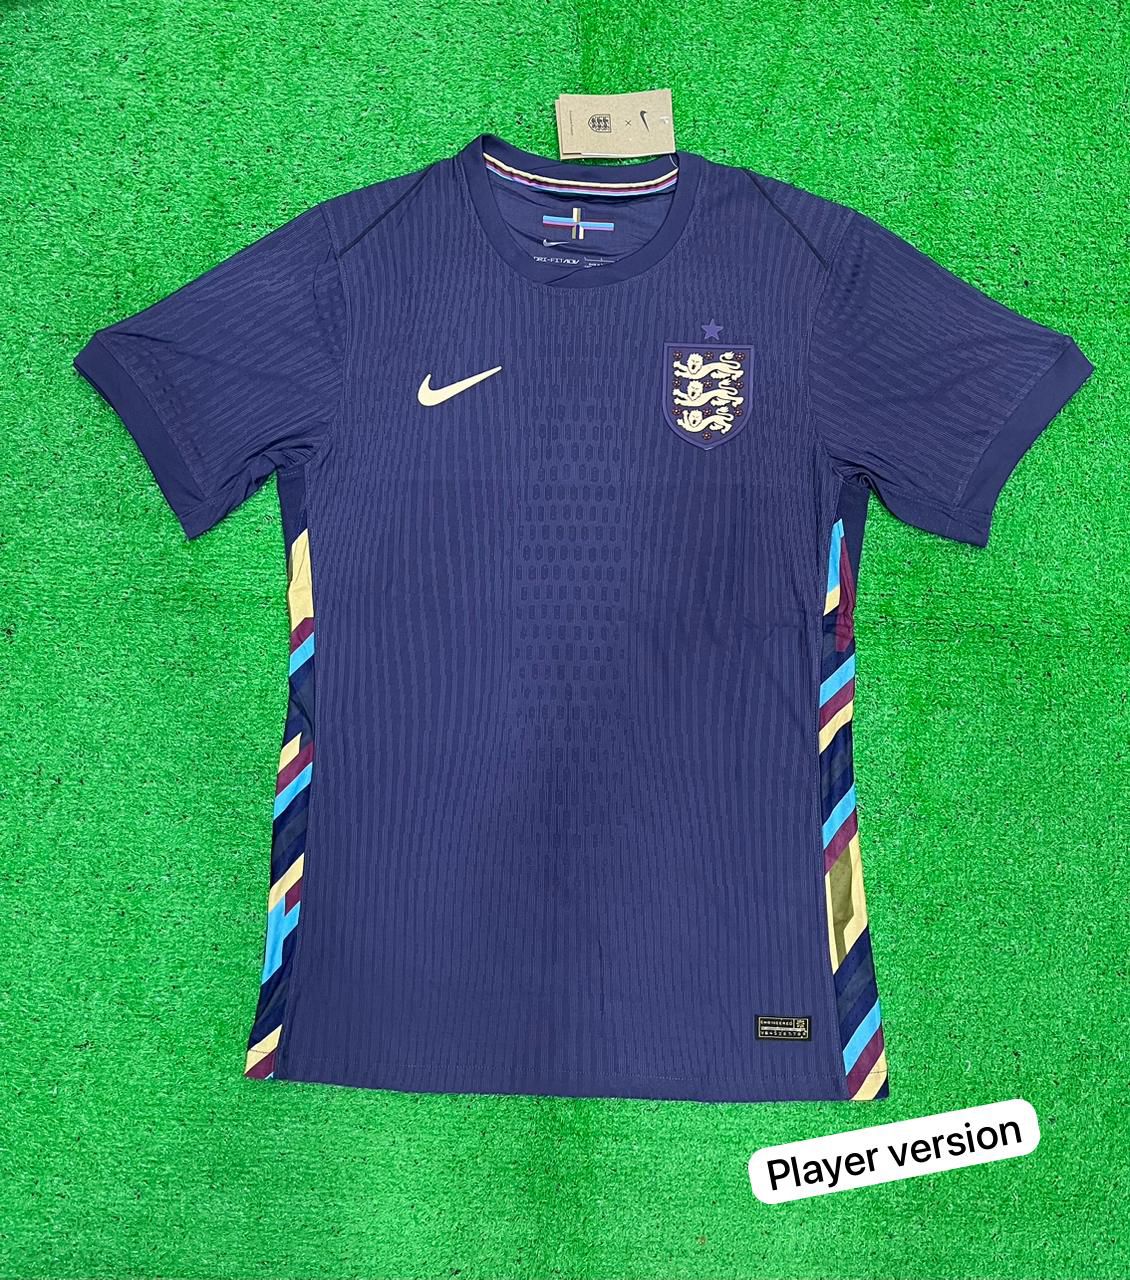 ENGLAND AWAY JERSEY PLAYER VERSION QUALITY